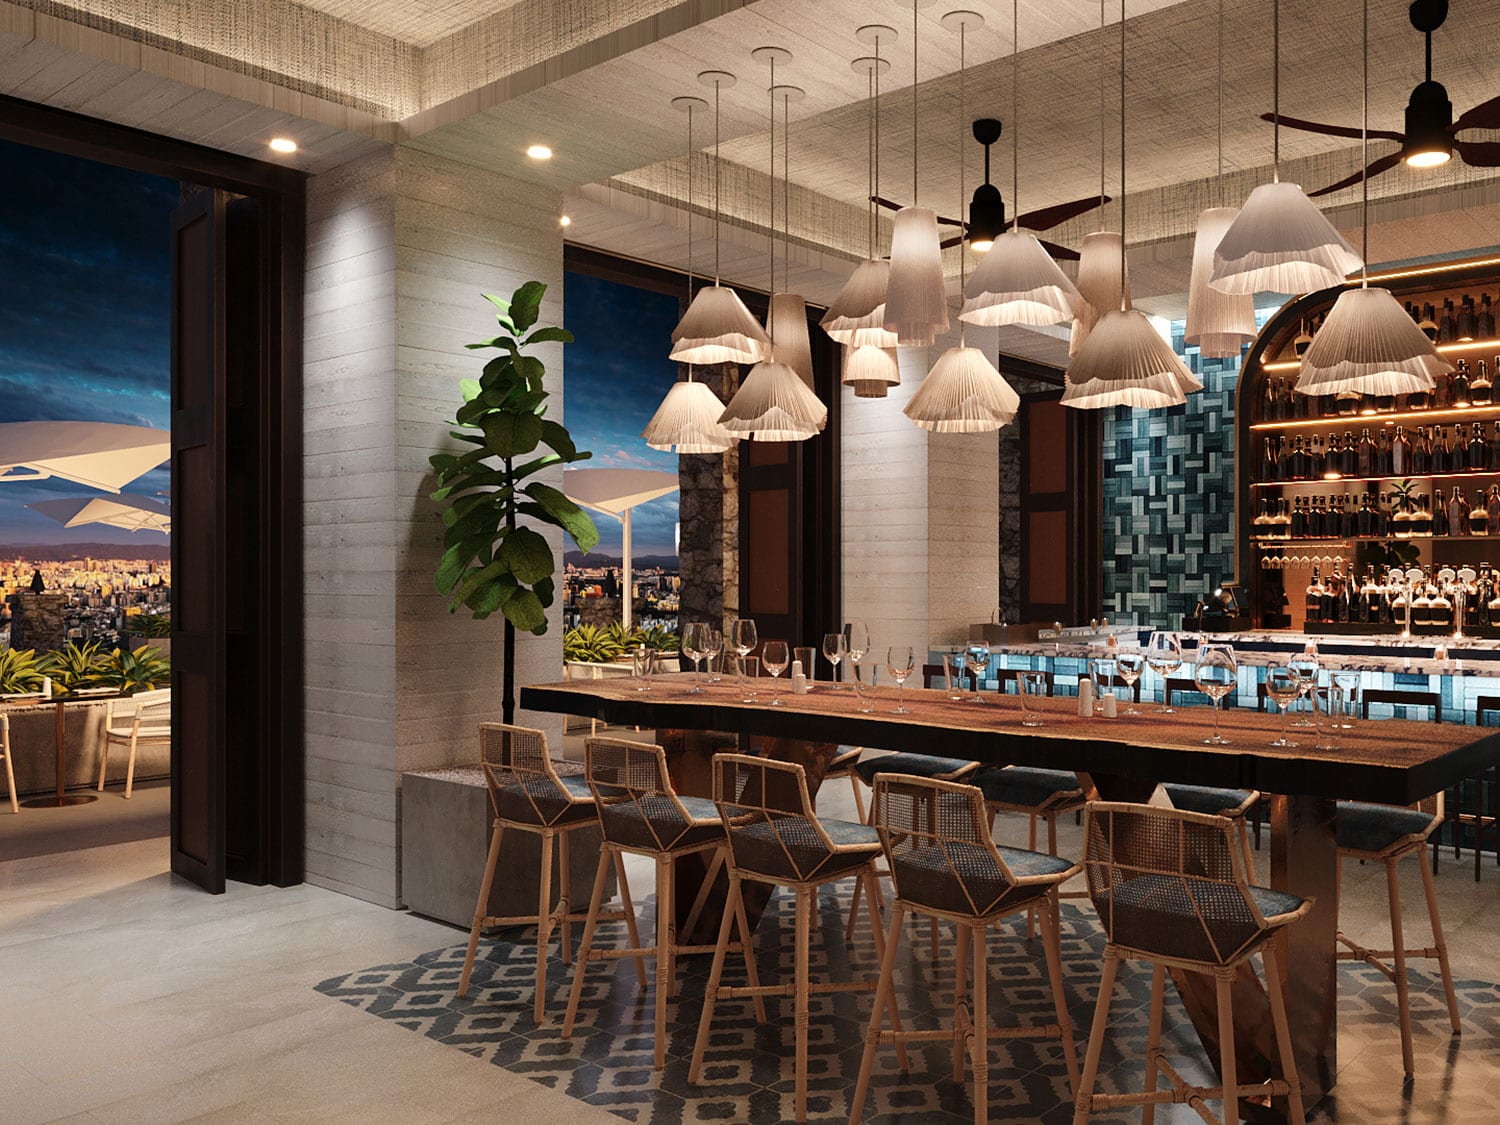 A rendering of the Sugarfin restaurant at Frenchman's Reef in St. Thomas, U.S. Virgin Islands.